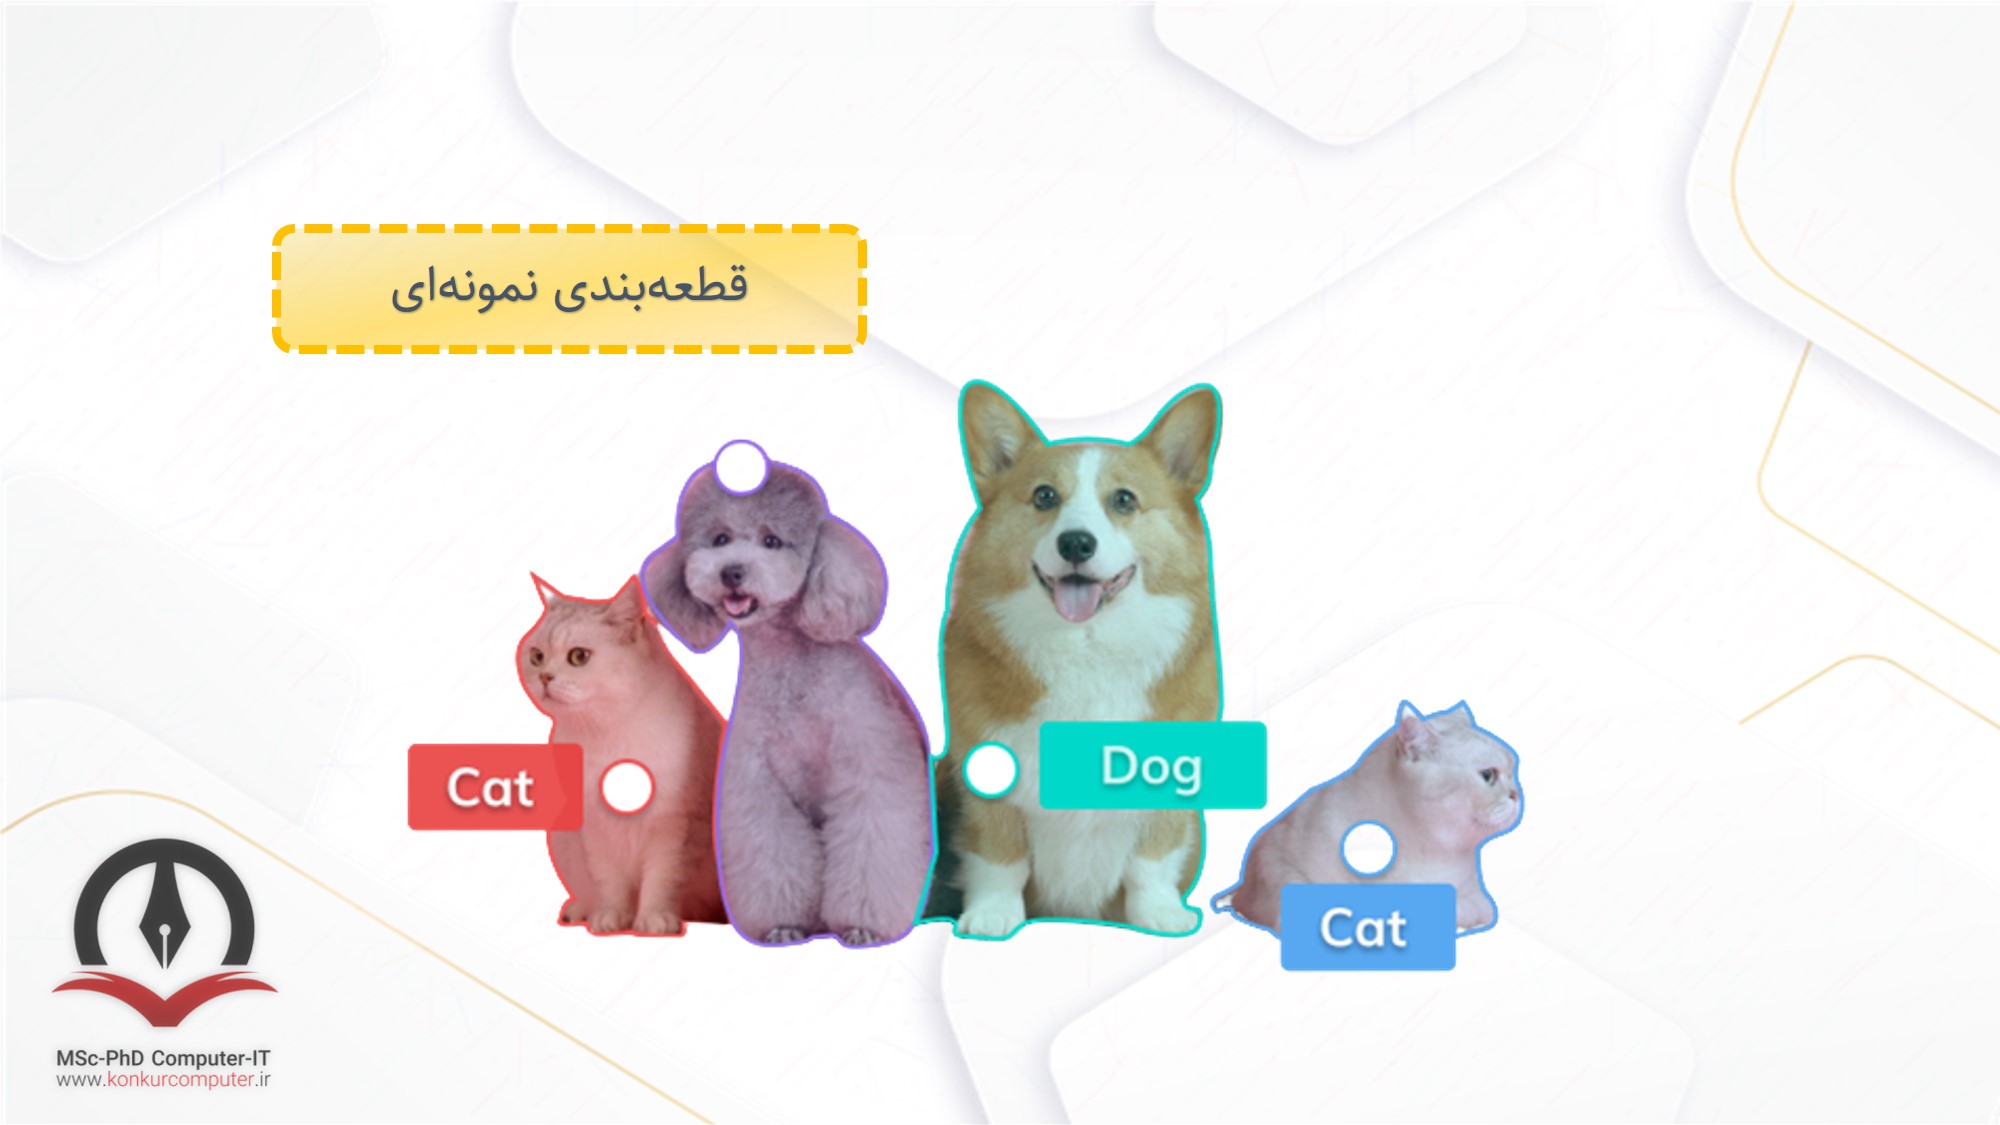 image instance segmentation dogs and cats